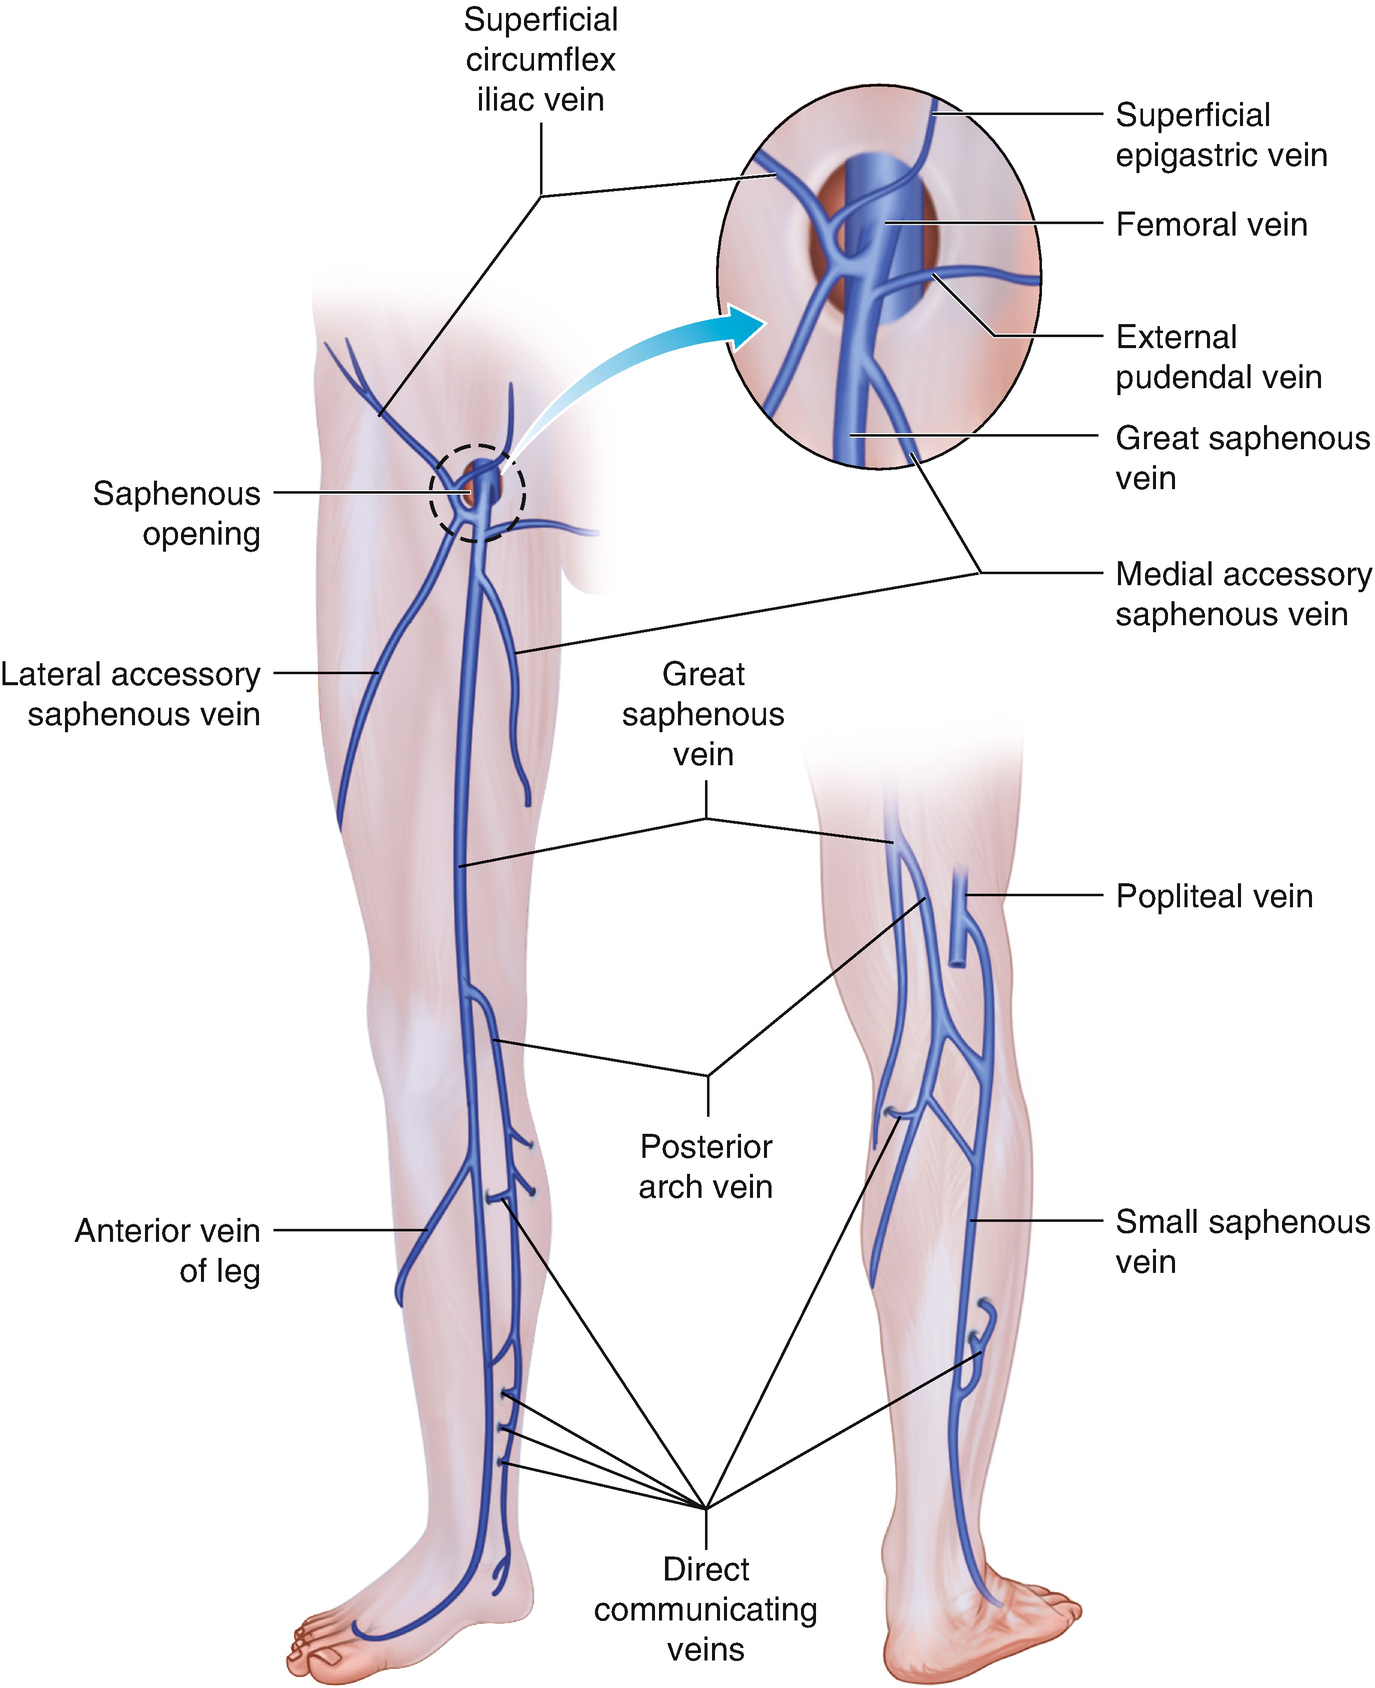 sites of communicating veins)